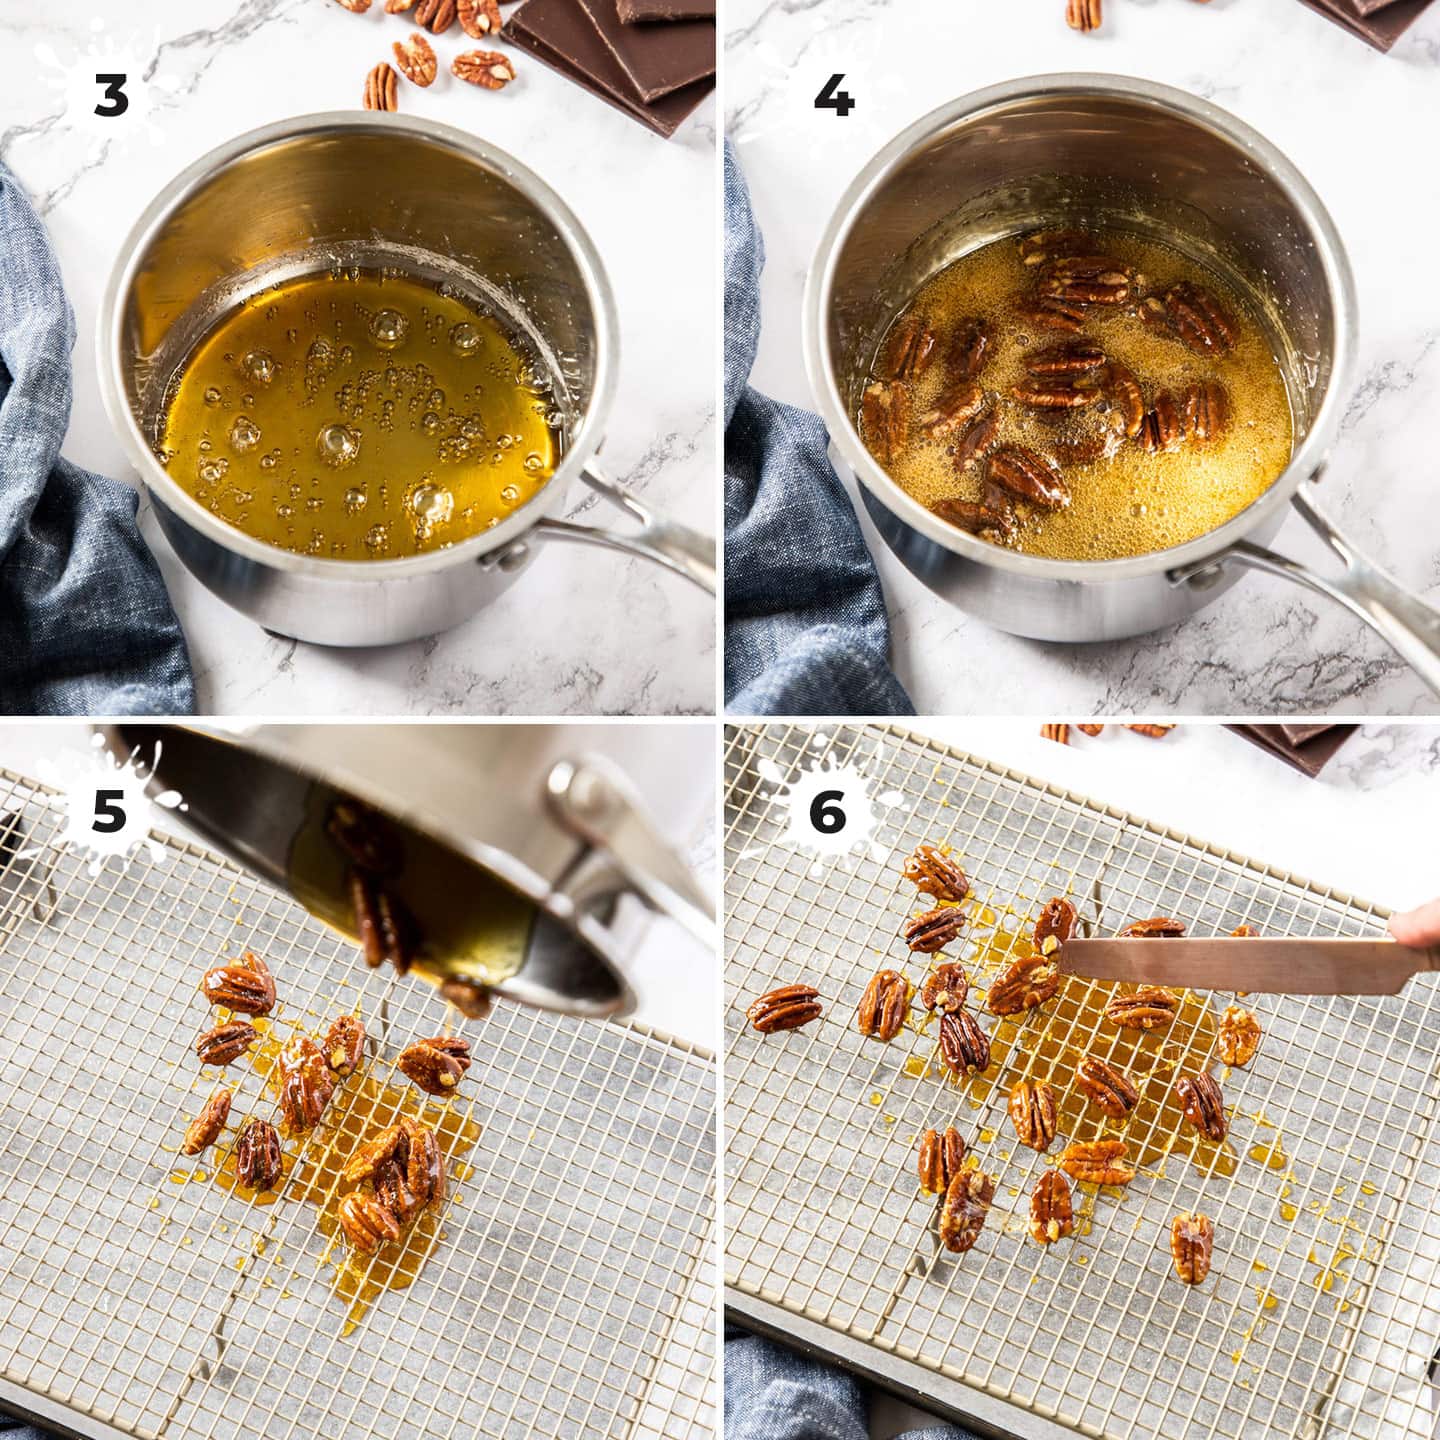 4 images showing pecans coated in caramel then resting on a wire rack